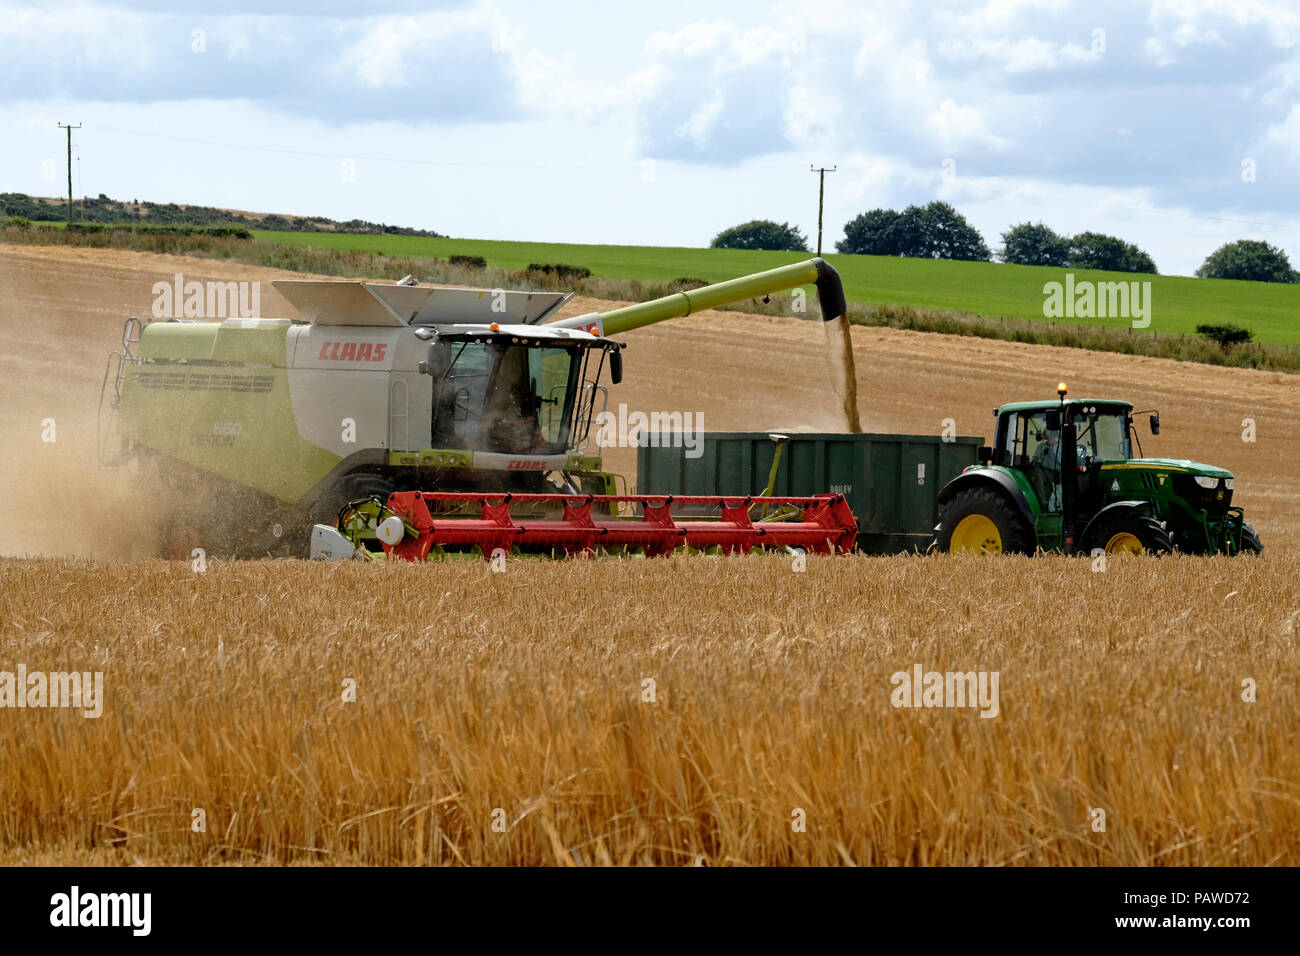 Kelso, Scotland, 25 July 2018.   Combine Harvester in Scottish Borders Tom Stewart from Sandyknowe Farm, near Kelso in the Scottish Borders, in a Claas Lexion 660 with Vario 770 cutterbar combine harvester, working in fields near his farm on Wednesday 25 July 2018. transferring crop to a waiting tractor to move to the farm a few miles away.   (Photo by Rob Gray / Freelance) Credit: Rob Gray/Alamy Live News Stock Photo